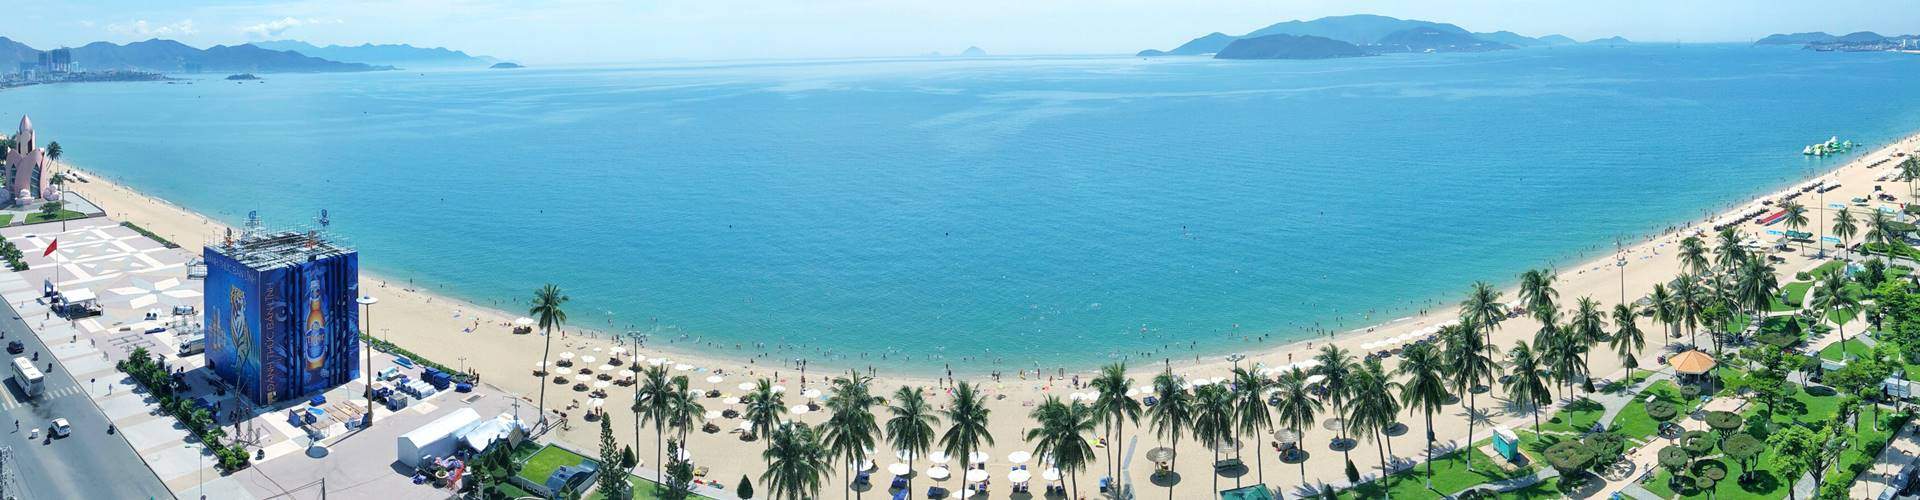 nha trang city and beach overview